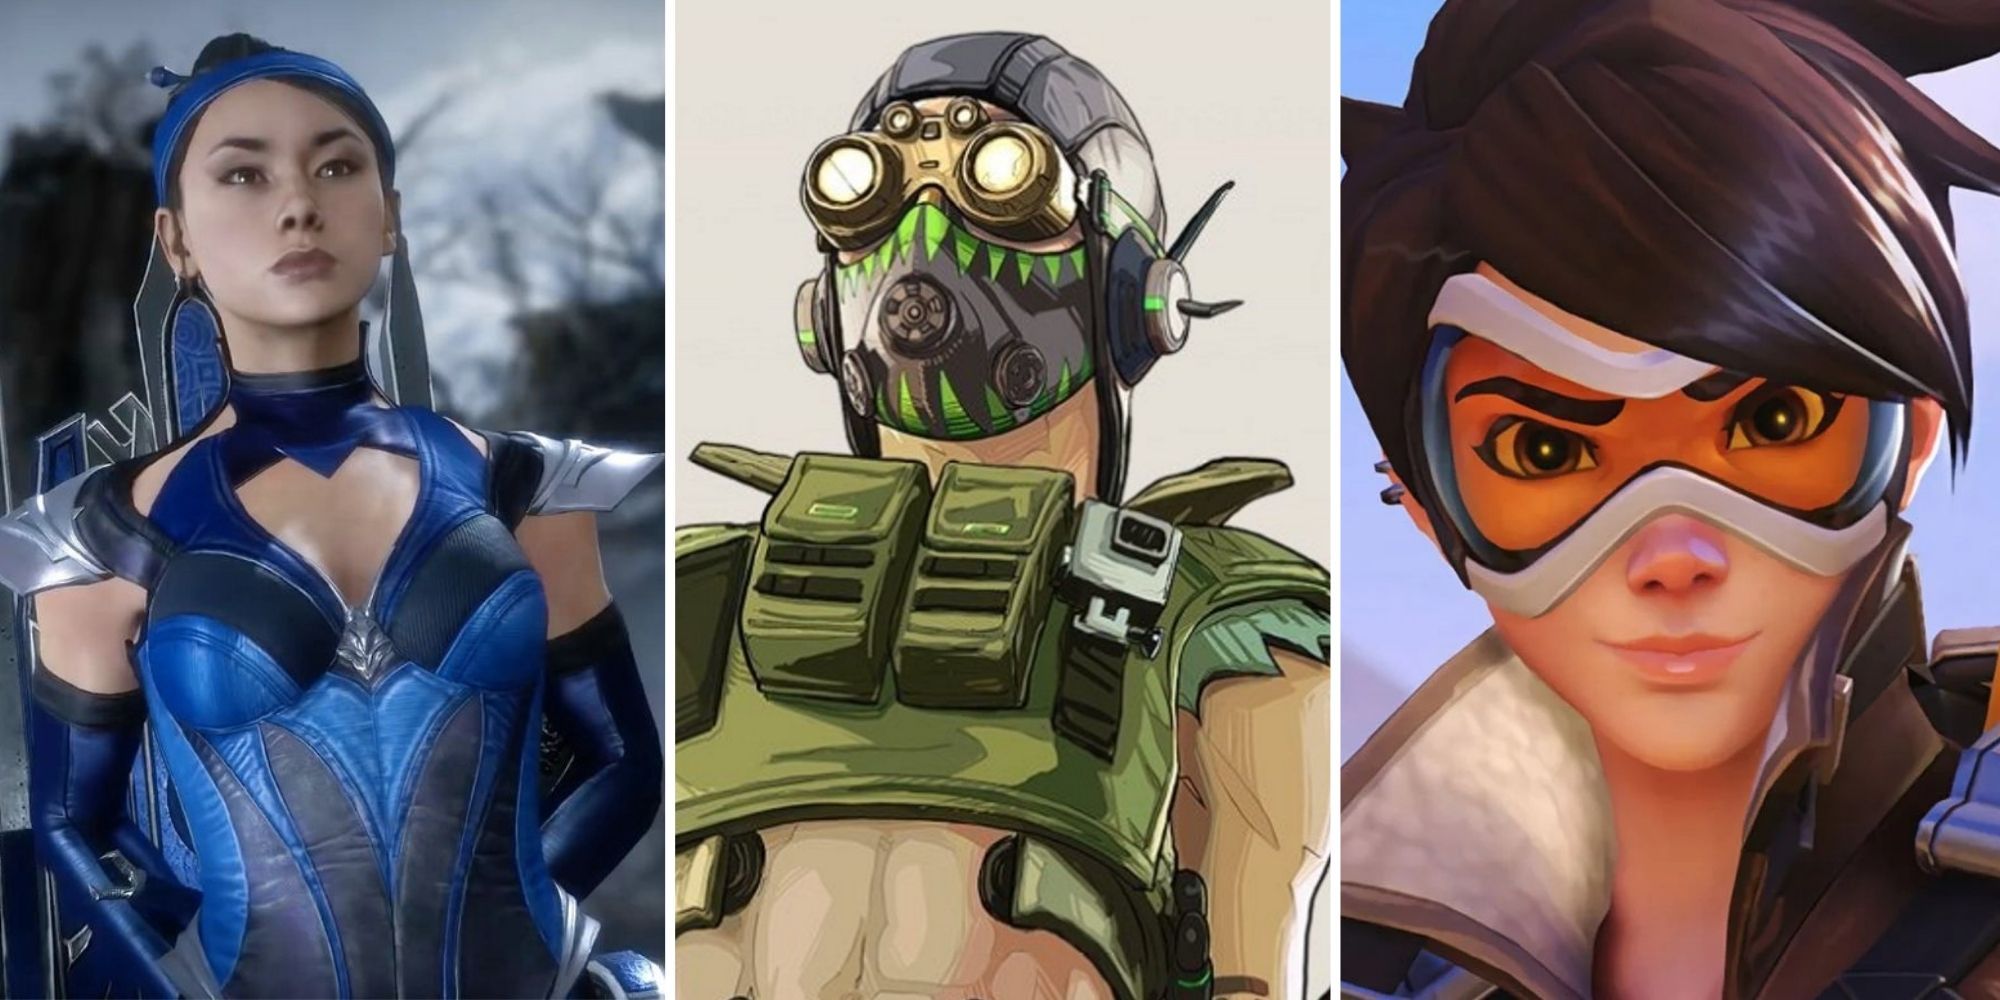 On the left is an image of Kitana from Mortal Kombat, the middle is Octane from Apex Legends and on the right is a close-up of Tracer from Overwatch